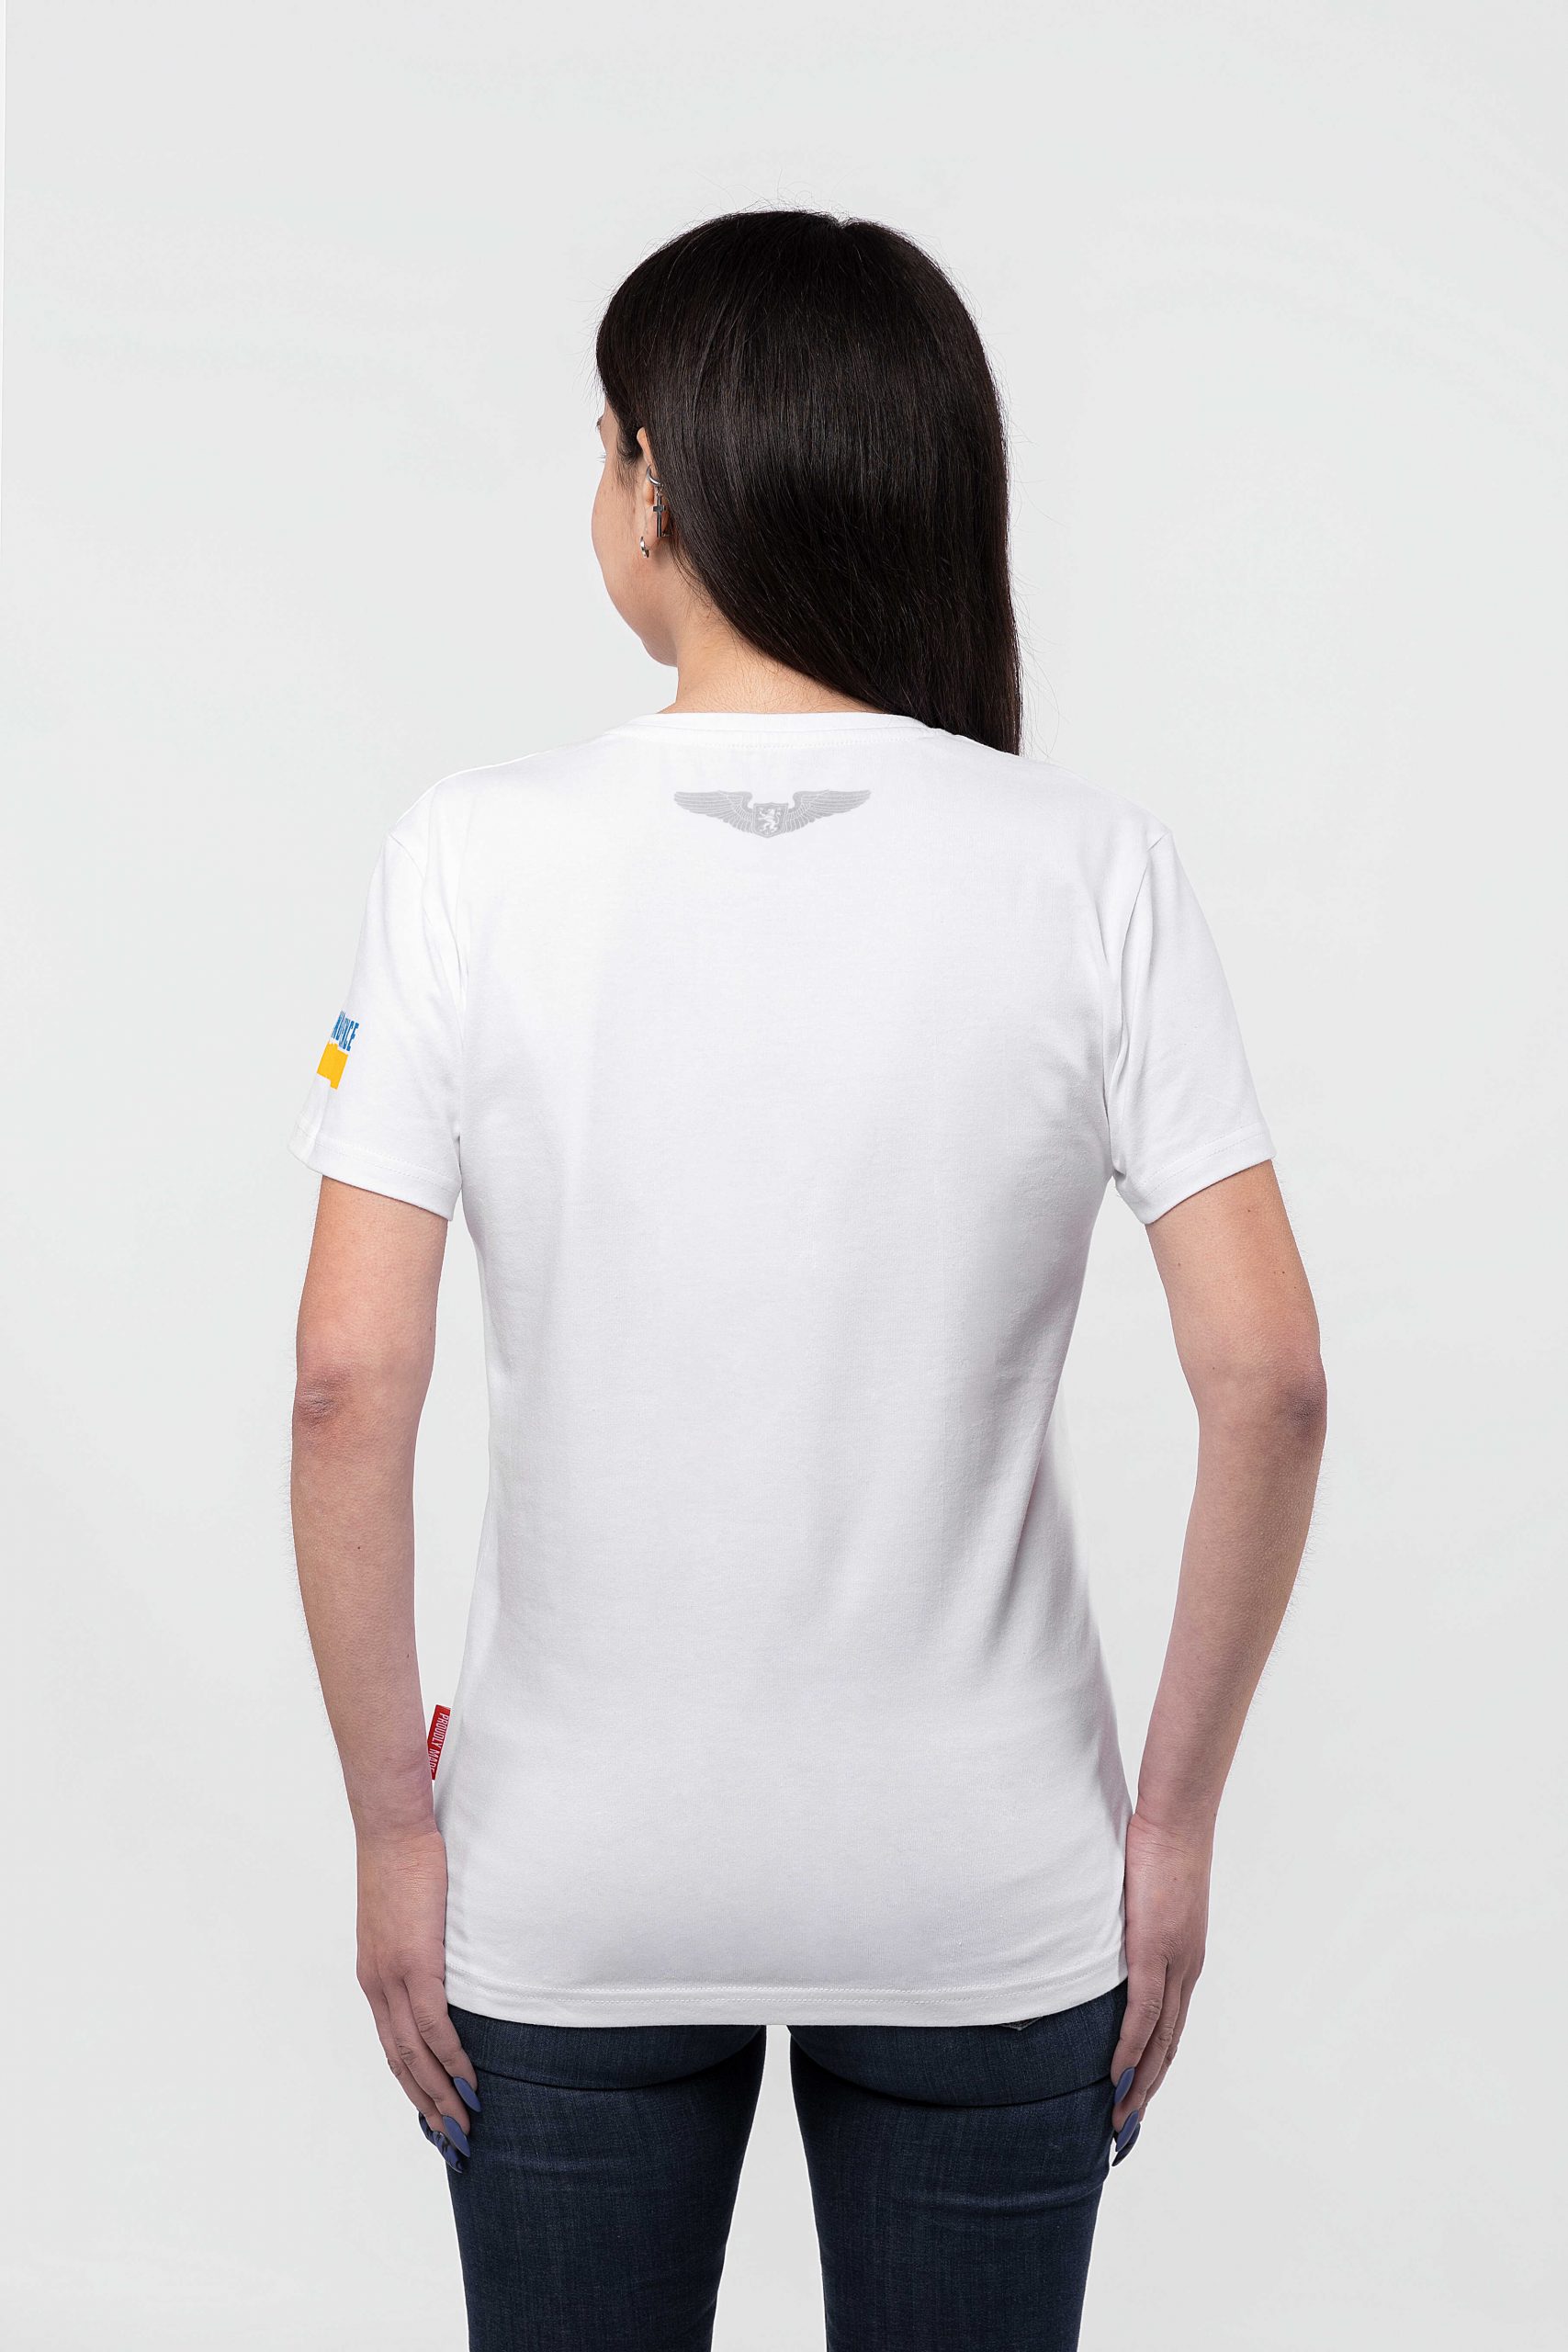 Women's T-Shirt From Ukraine With Nlaw. Color white. 1.